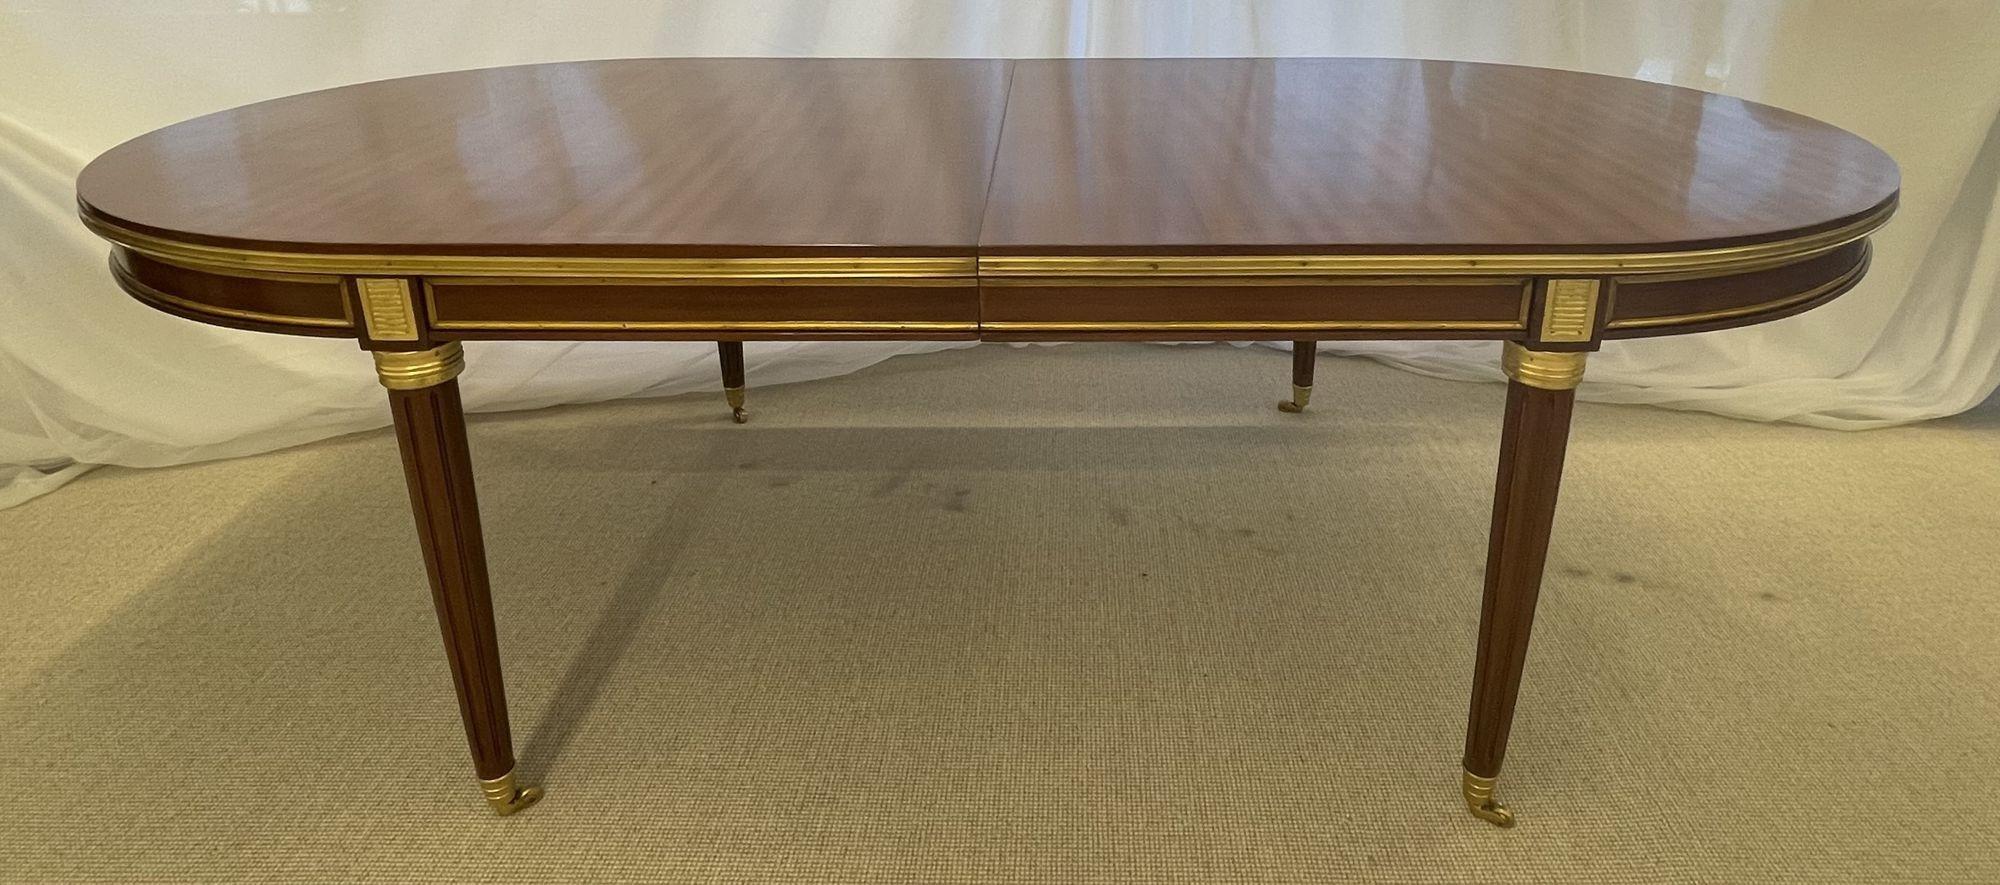 Maison Jansen Style Mahogany Dining, Conference Table, Louis XVI, Bronze In Good Condition For Sale In Stamford, CT